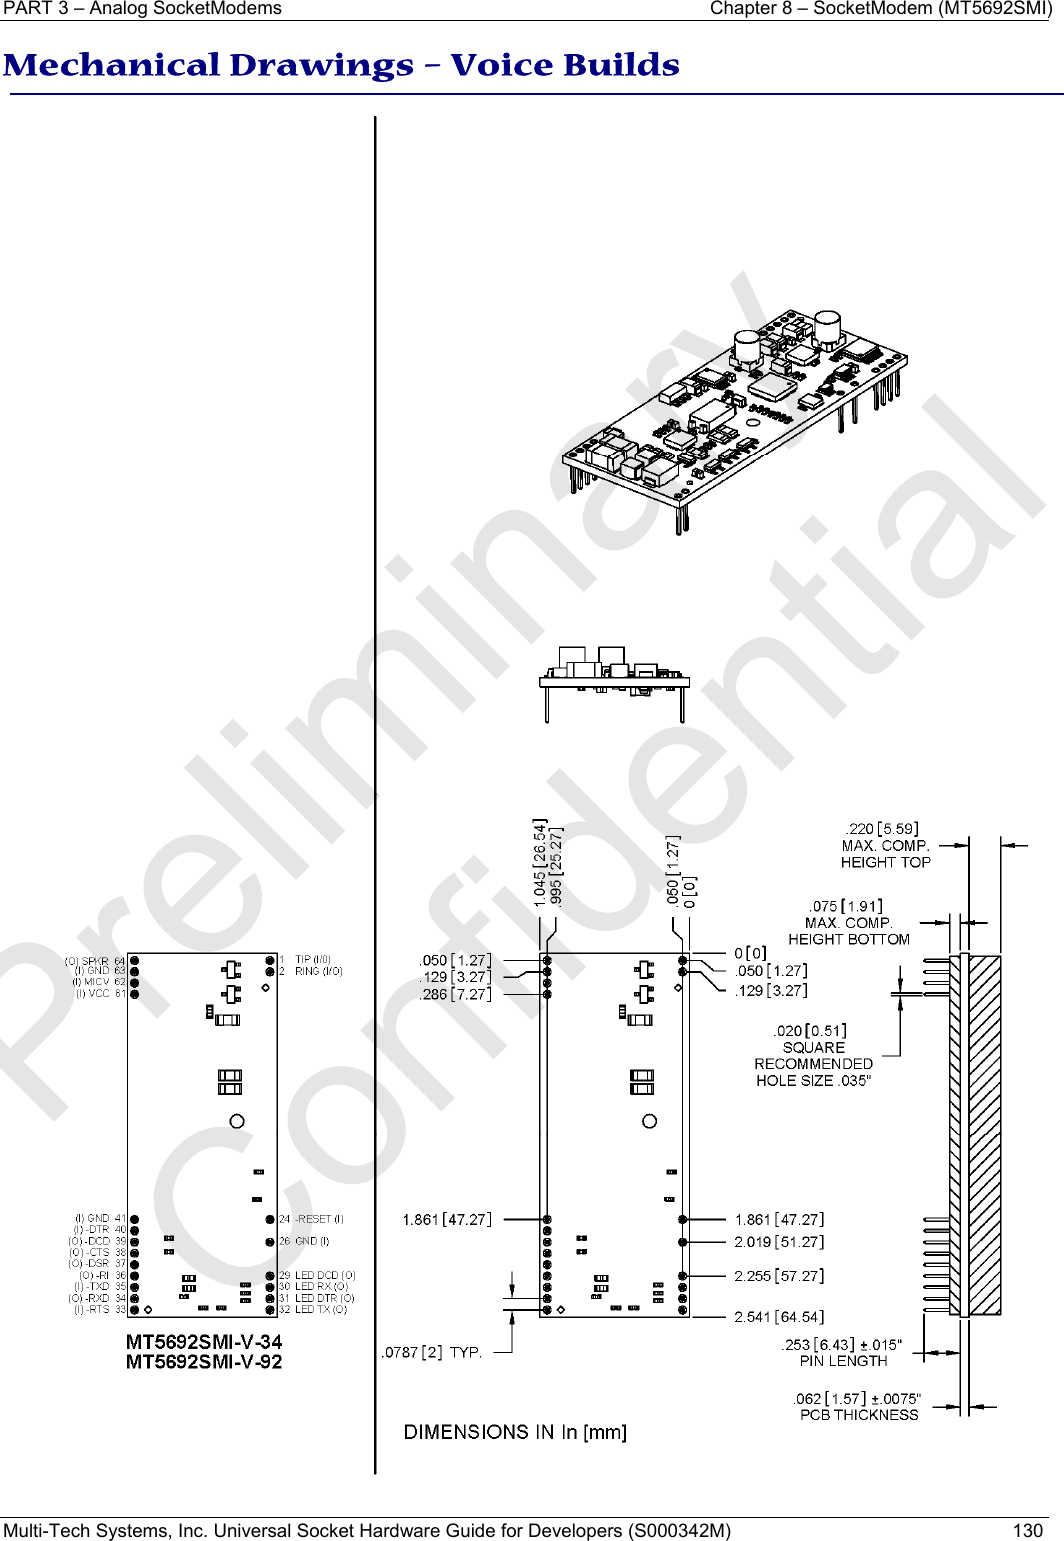 PART 3 – Analog SocketModems    Chapter 8 – SocketModem (MT5692SMI) Multi-Tech Systems, Inc. Universal Socket Hardware Guide for Developers (S000342M)  130  Mechanical Drawings – Voice Builds     Preliminary  Confidential